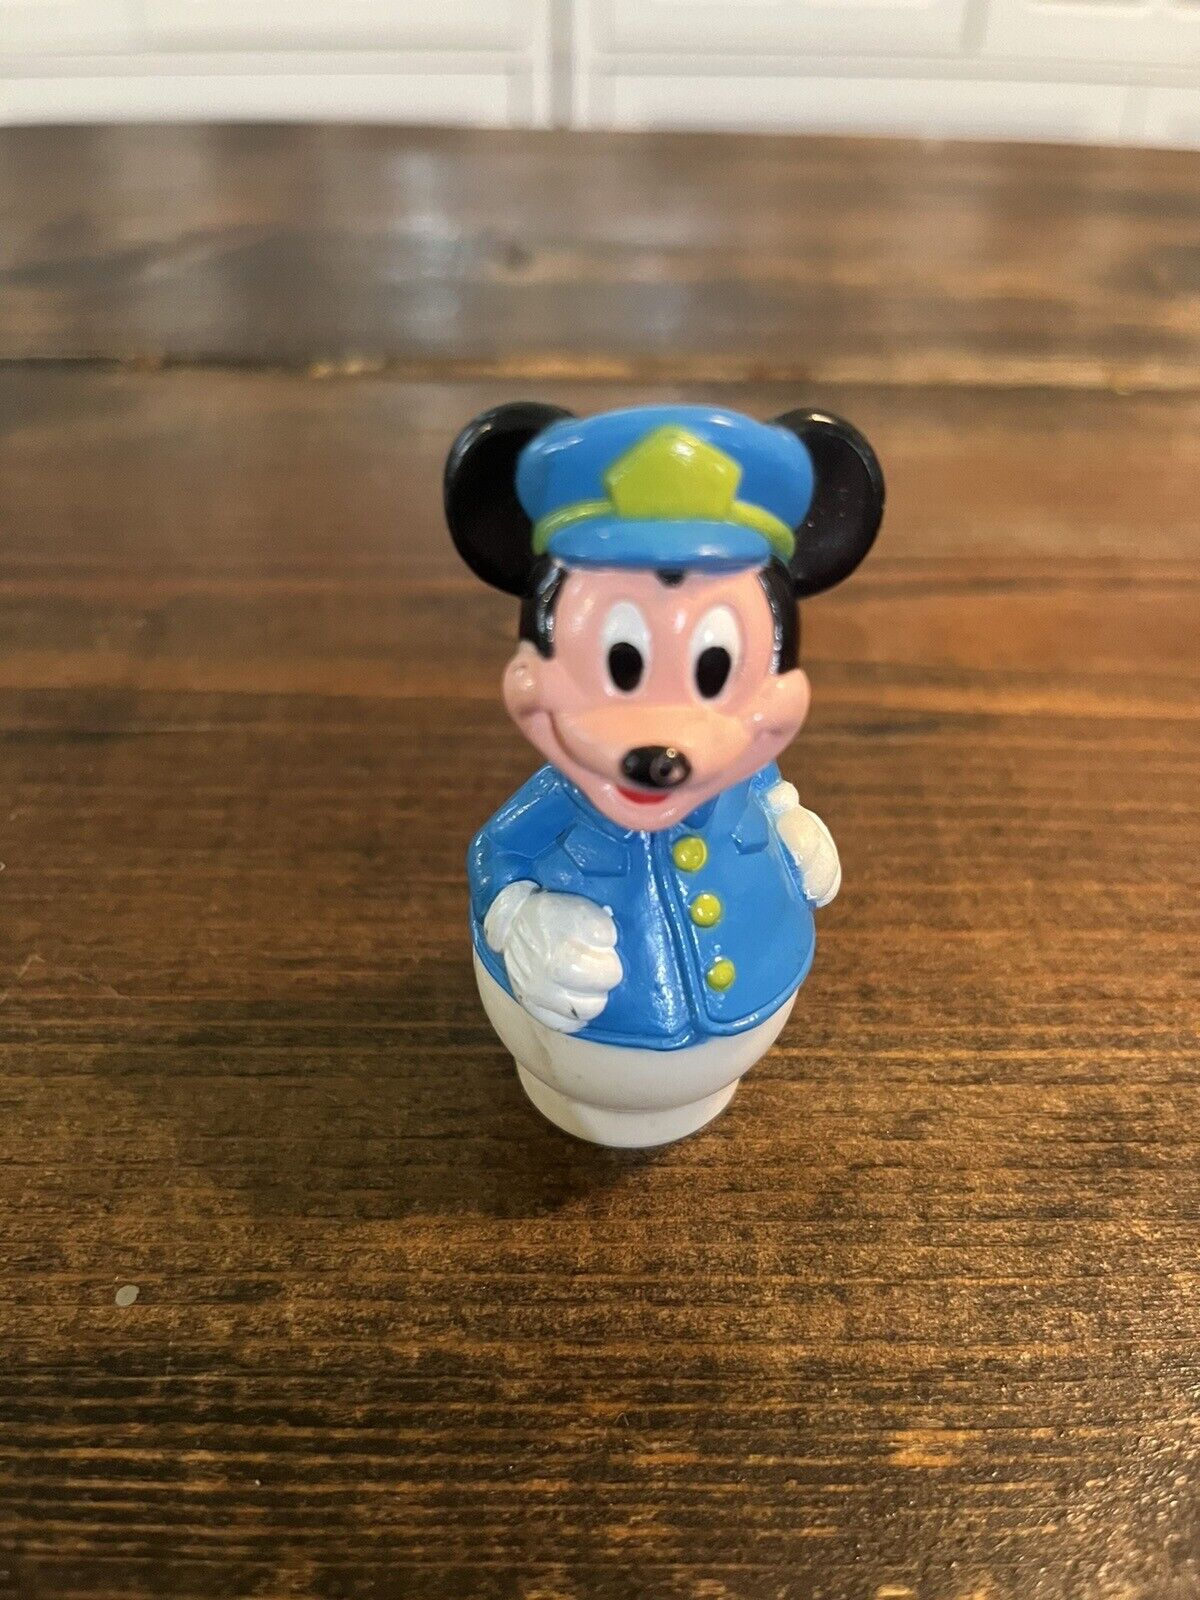 Vintage Mickey Mouse Figurine From Jet Set Playset 1980’s